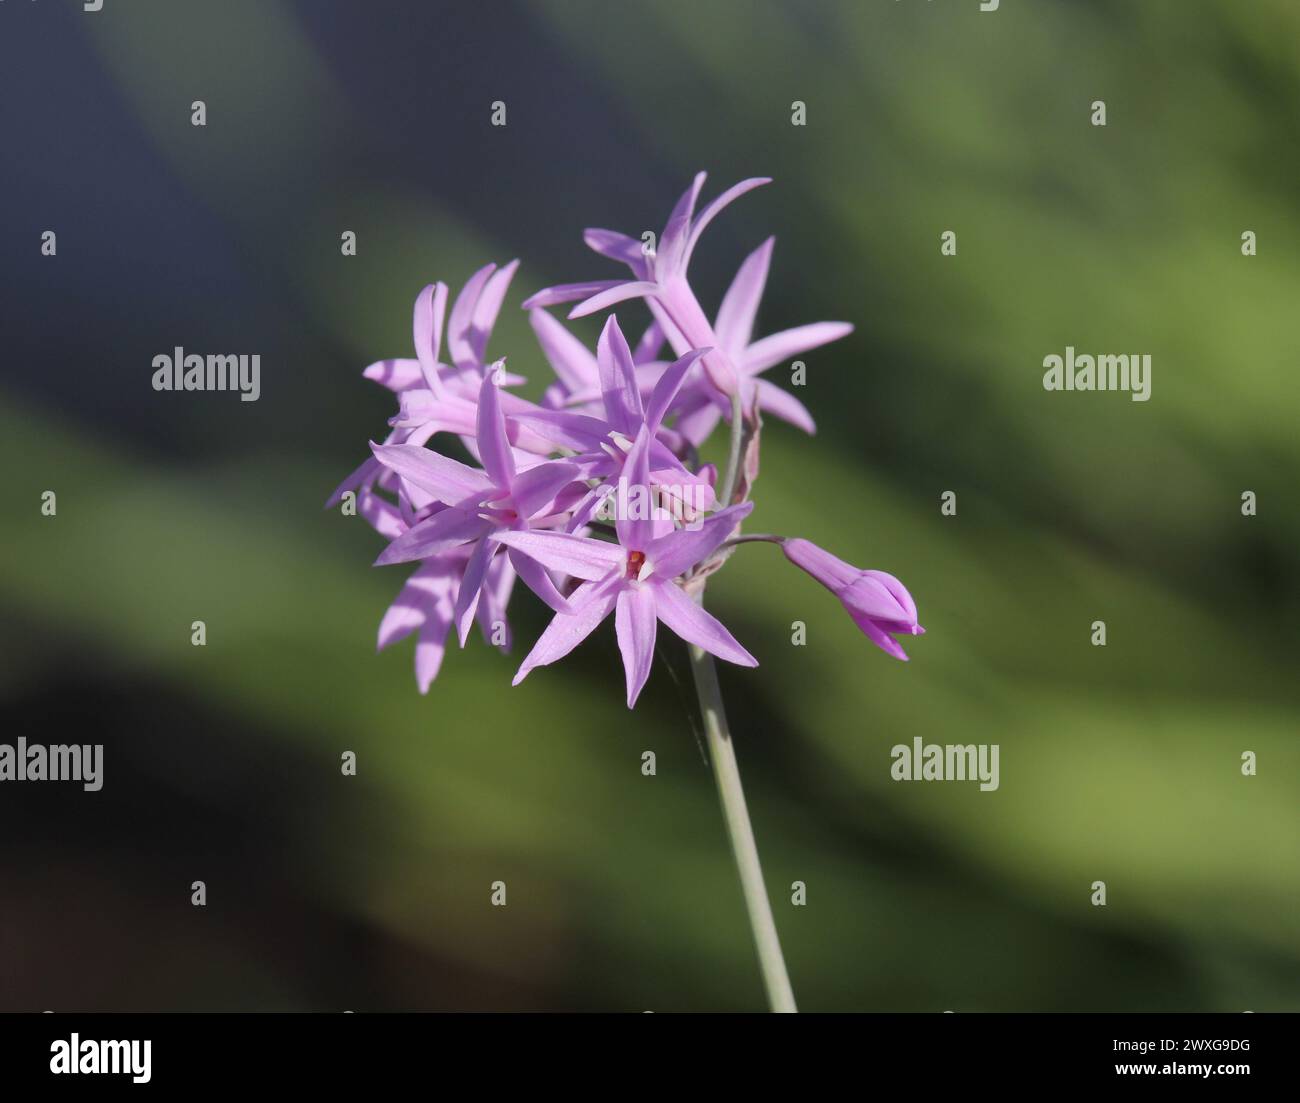 Society garlic (tulbaghia) flower on a plant in a garden Stock Photo